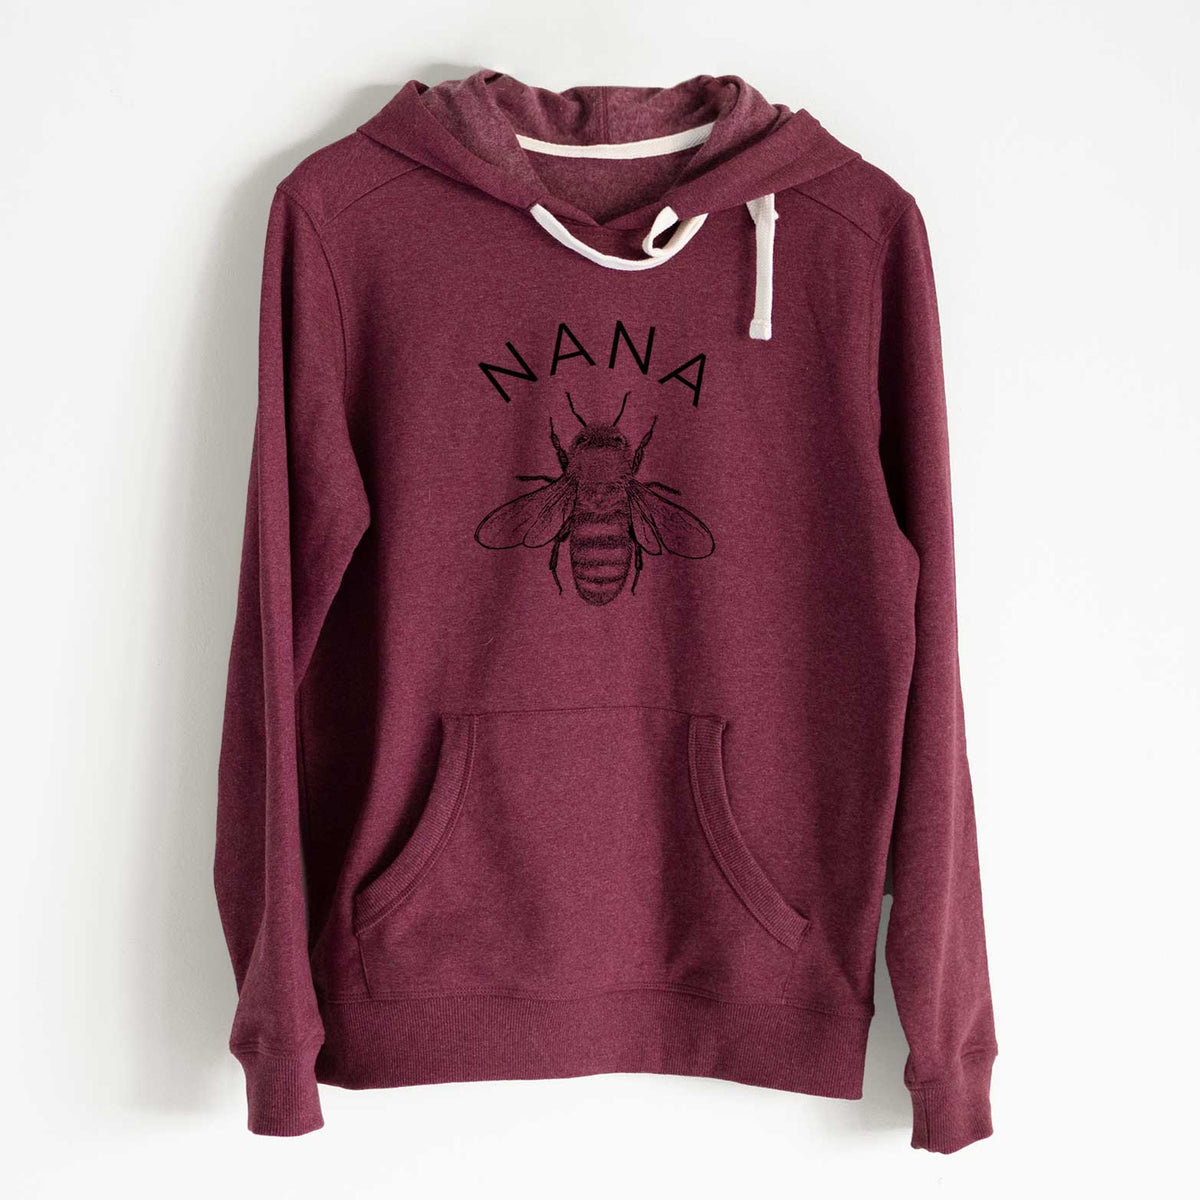 Nana Bee - Unisex Recycled Hoodie - CLOSEOUT - FINAL SALE